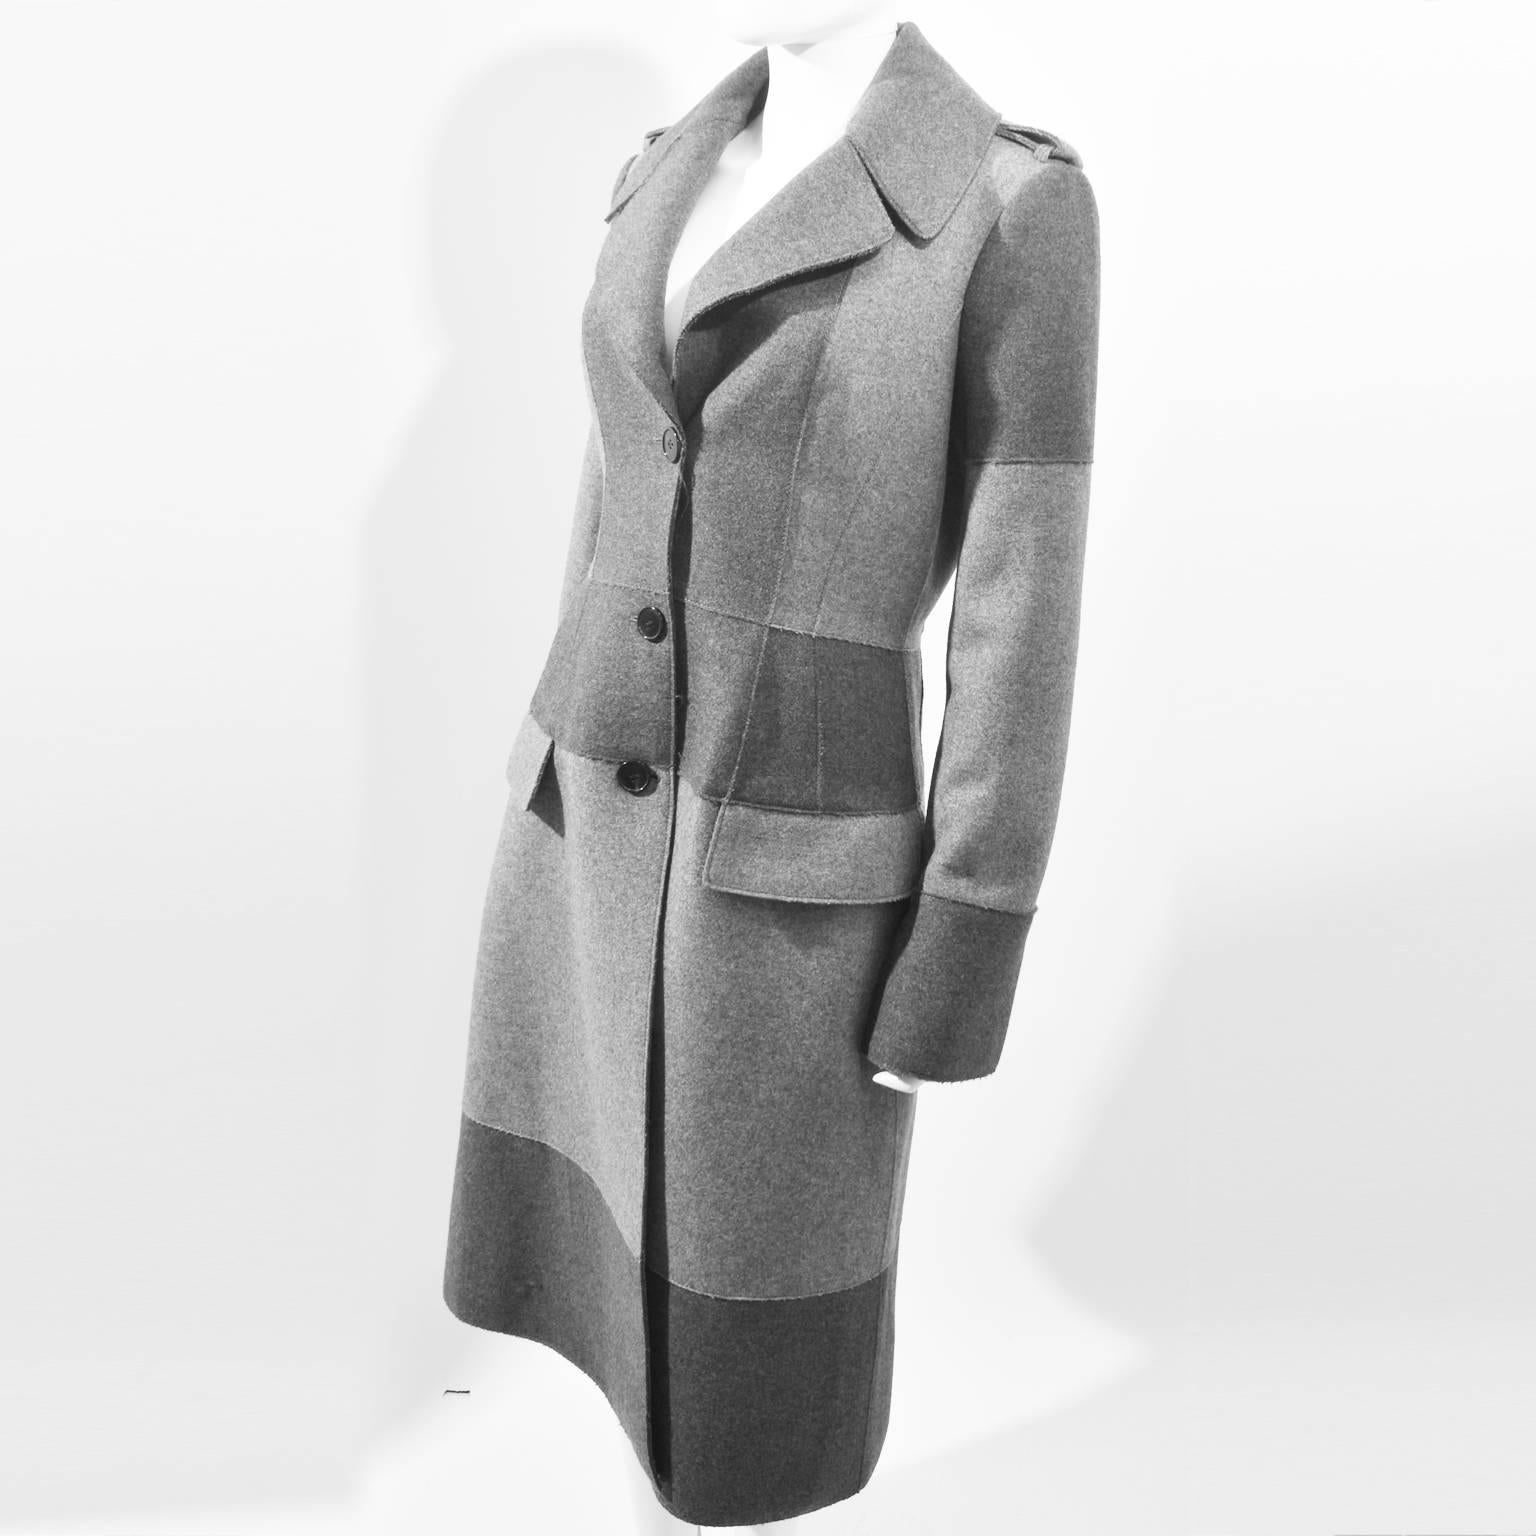 A beautiful and luxurious wool coat by Alexander McQueen. The coat has a large collar, and a slim fitted shape with a button-up fastening, epaulettes and two pockets at the hip. The coat is made from two tones of grey wool that are stitched together